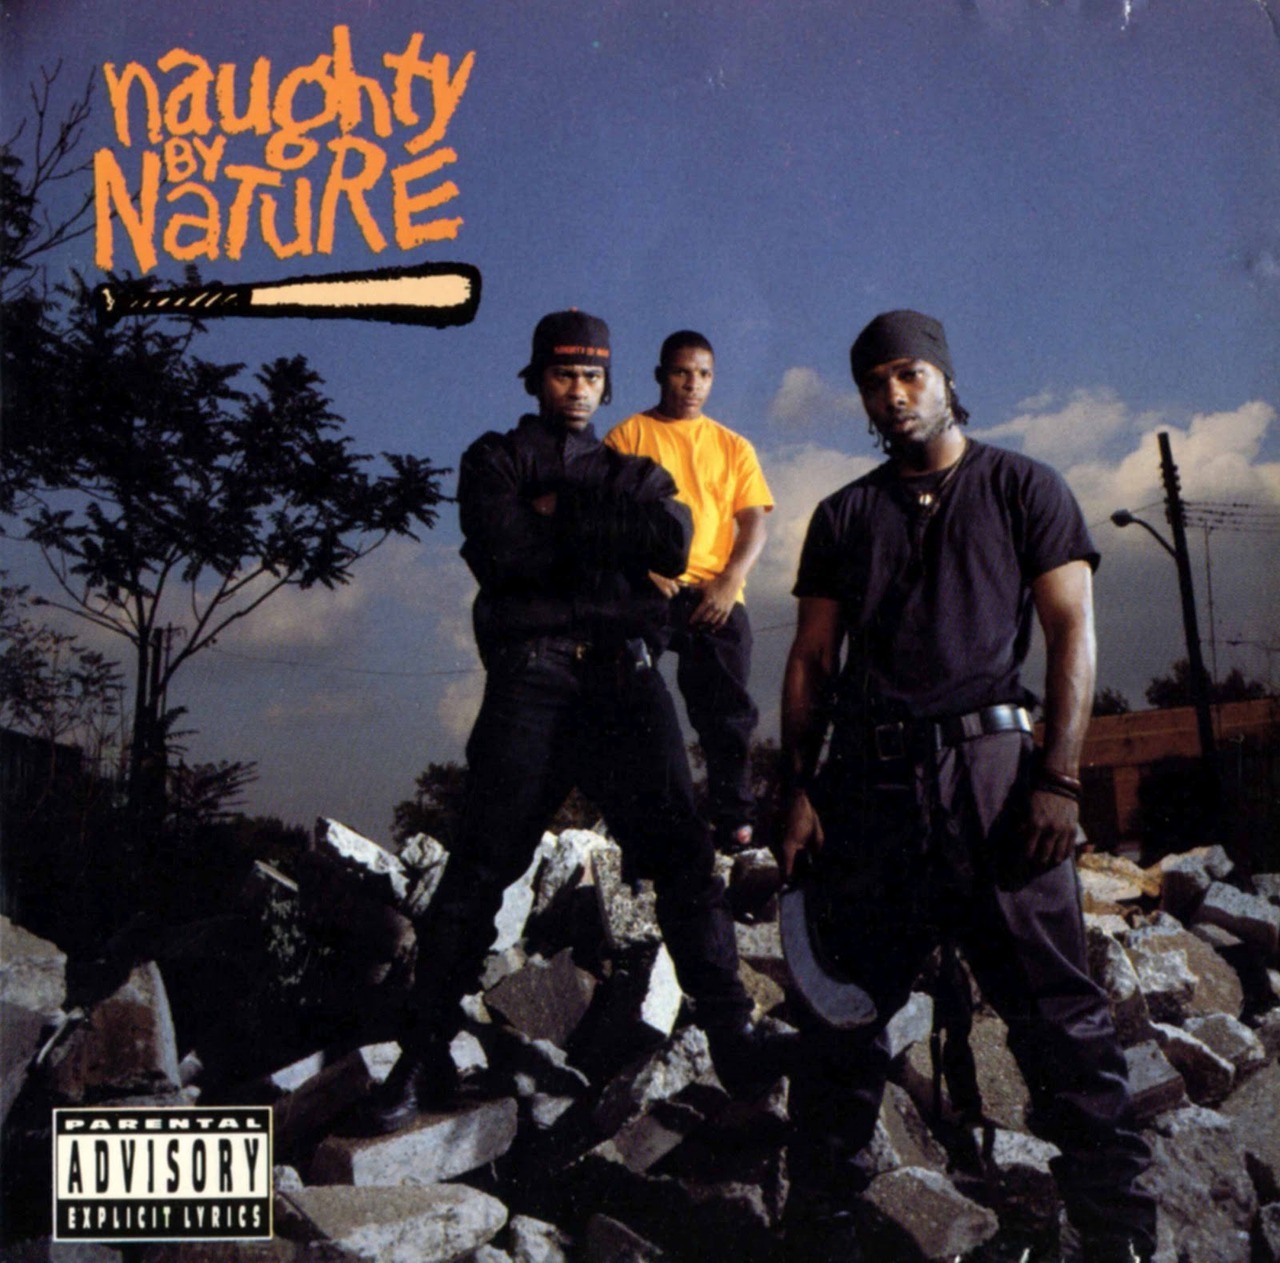 BACK IN THE DAY |9/3/91| Naughty By Nature released their second album, Naughty By